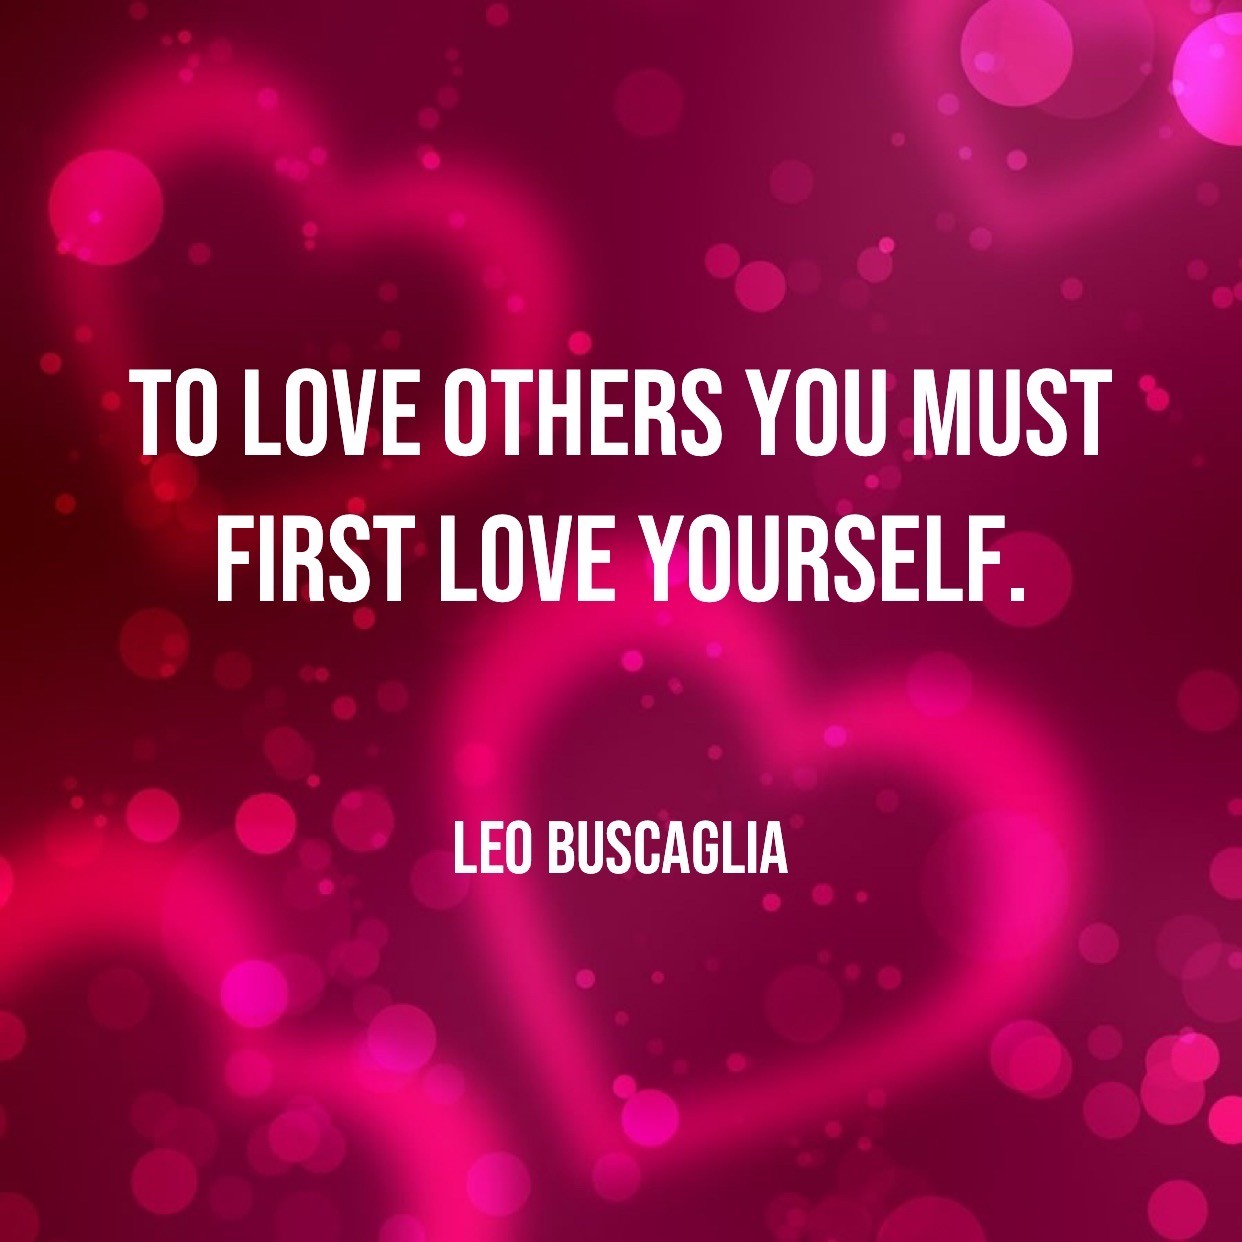 To Love Others You Must Love Yourself First - People Development Magazine